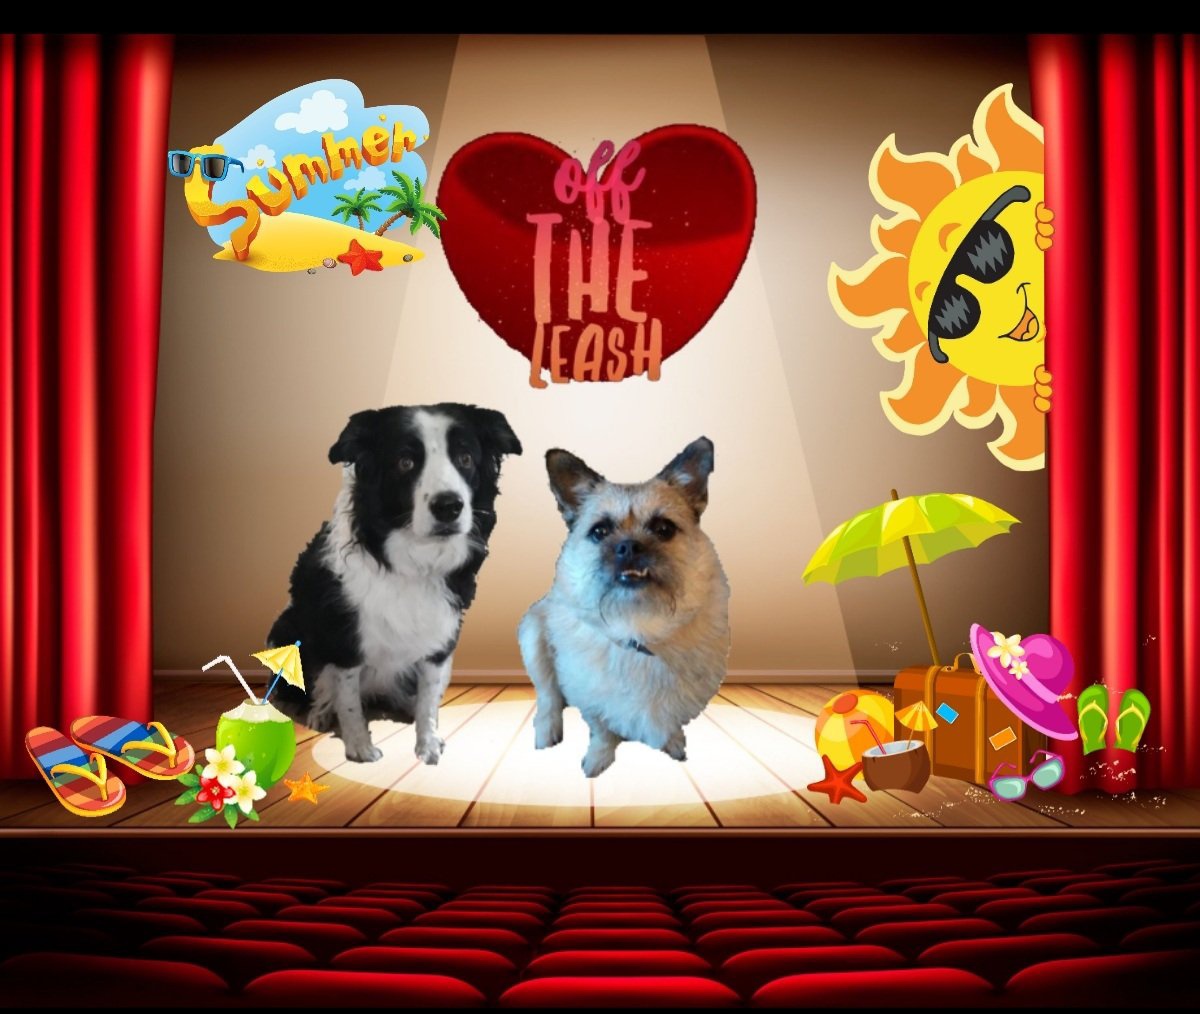 Woo hoo! its #OTLFP show time! Thankyou all for coming I know the humans have had another busy week so put your paws up &Lets get started! Its a bit different today as the warm weather has us thinking summer fun. So we want you all to join in today and share what you'd like to do